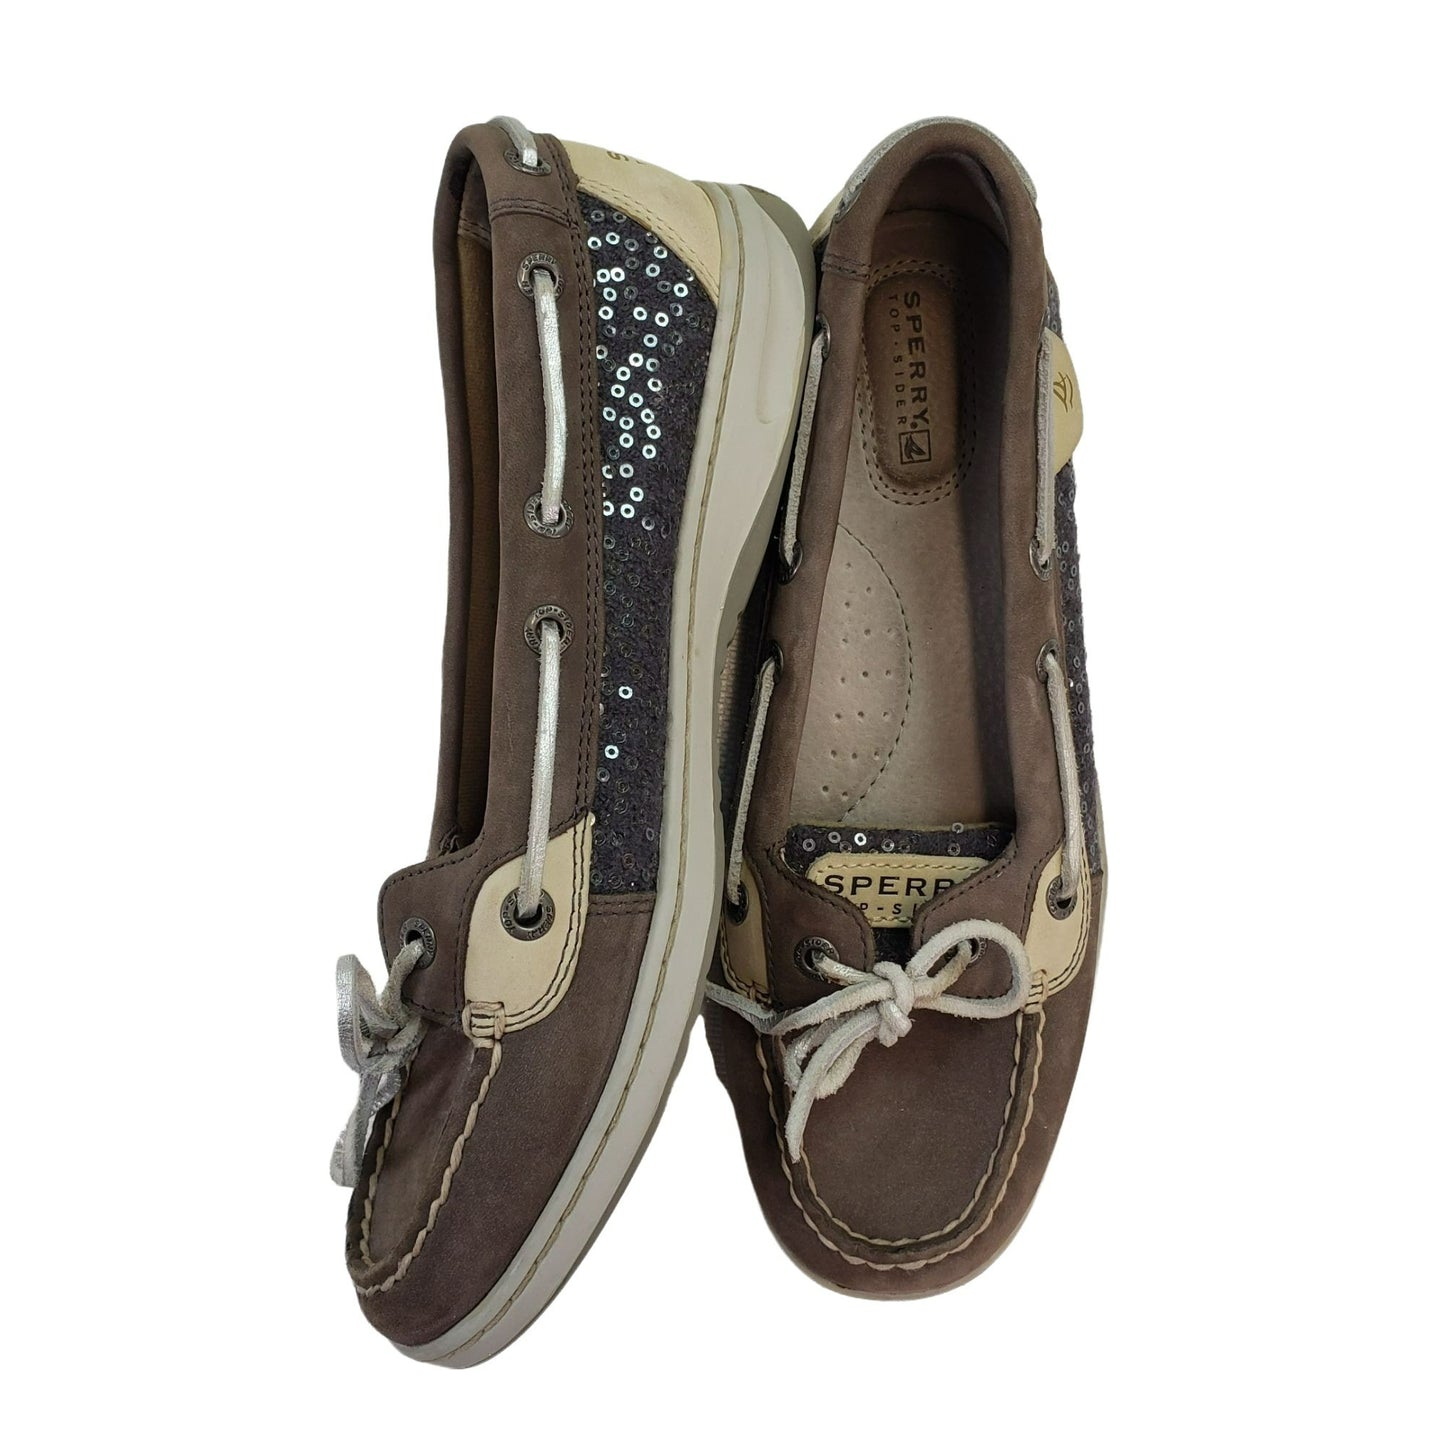 Sperry Top-Sider Firefish Leather Boat Shoes with Sequin Accents Size 8